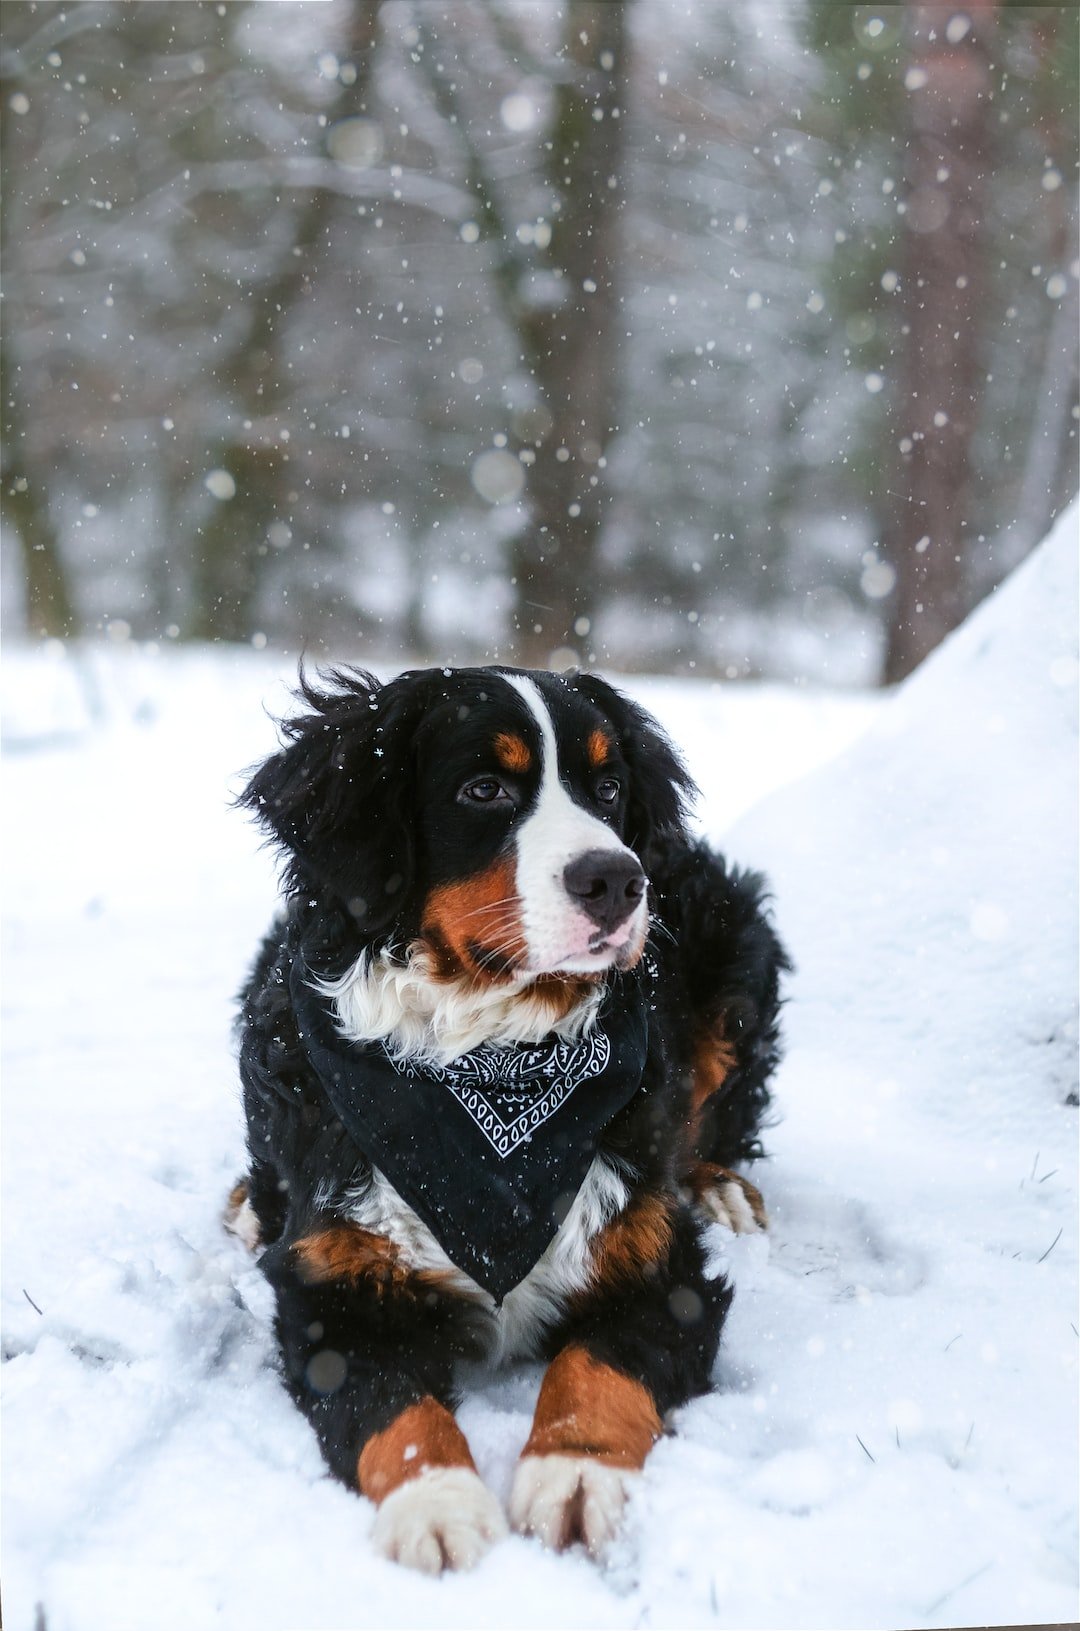 Bundle Up Your Furry Friend: Keeping Your Pet Warm in Winter - PETGS